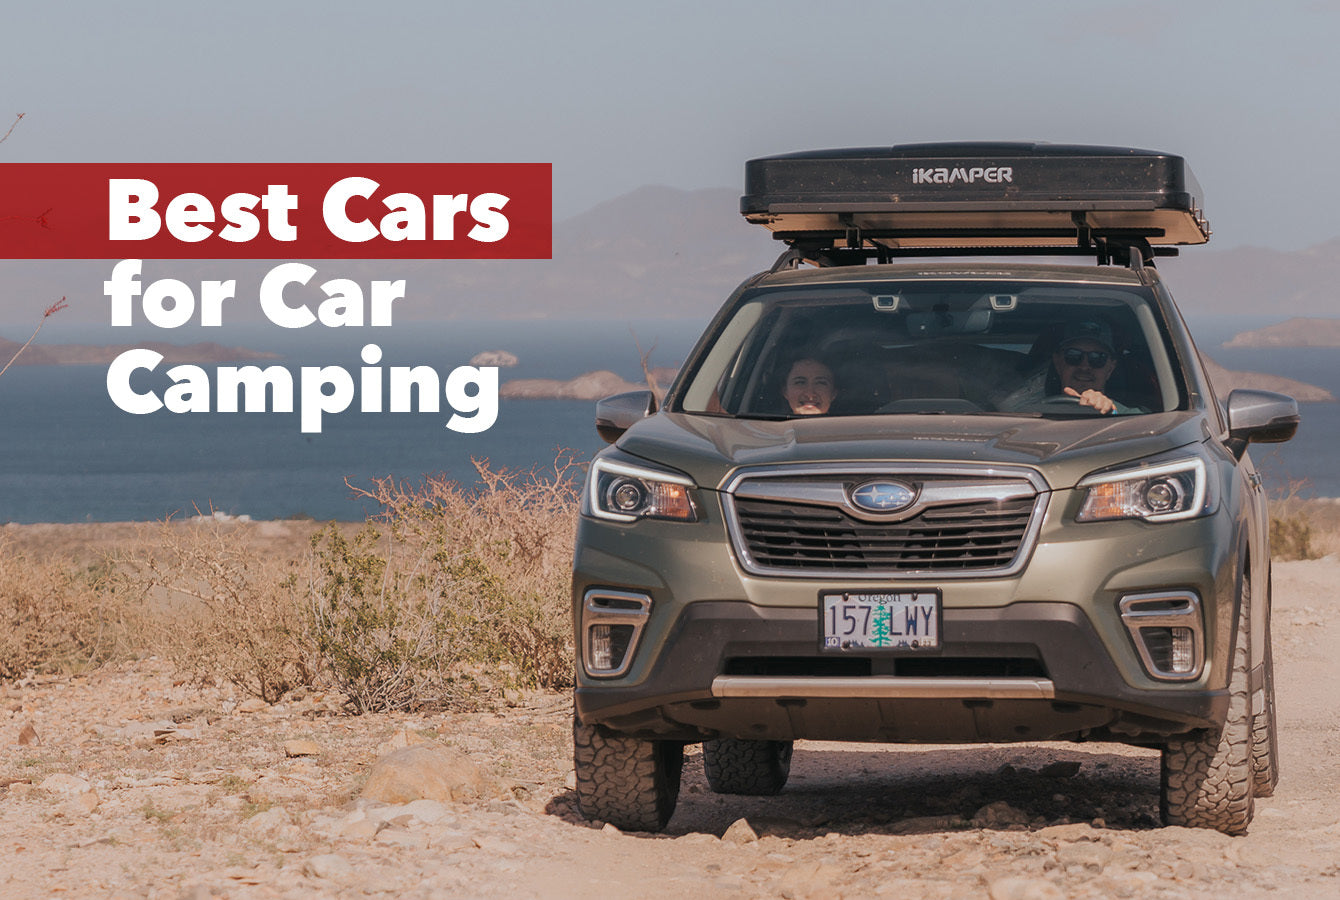 Best Cars for Camping The Ultimate Guide for Camping Vehicles iKamper